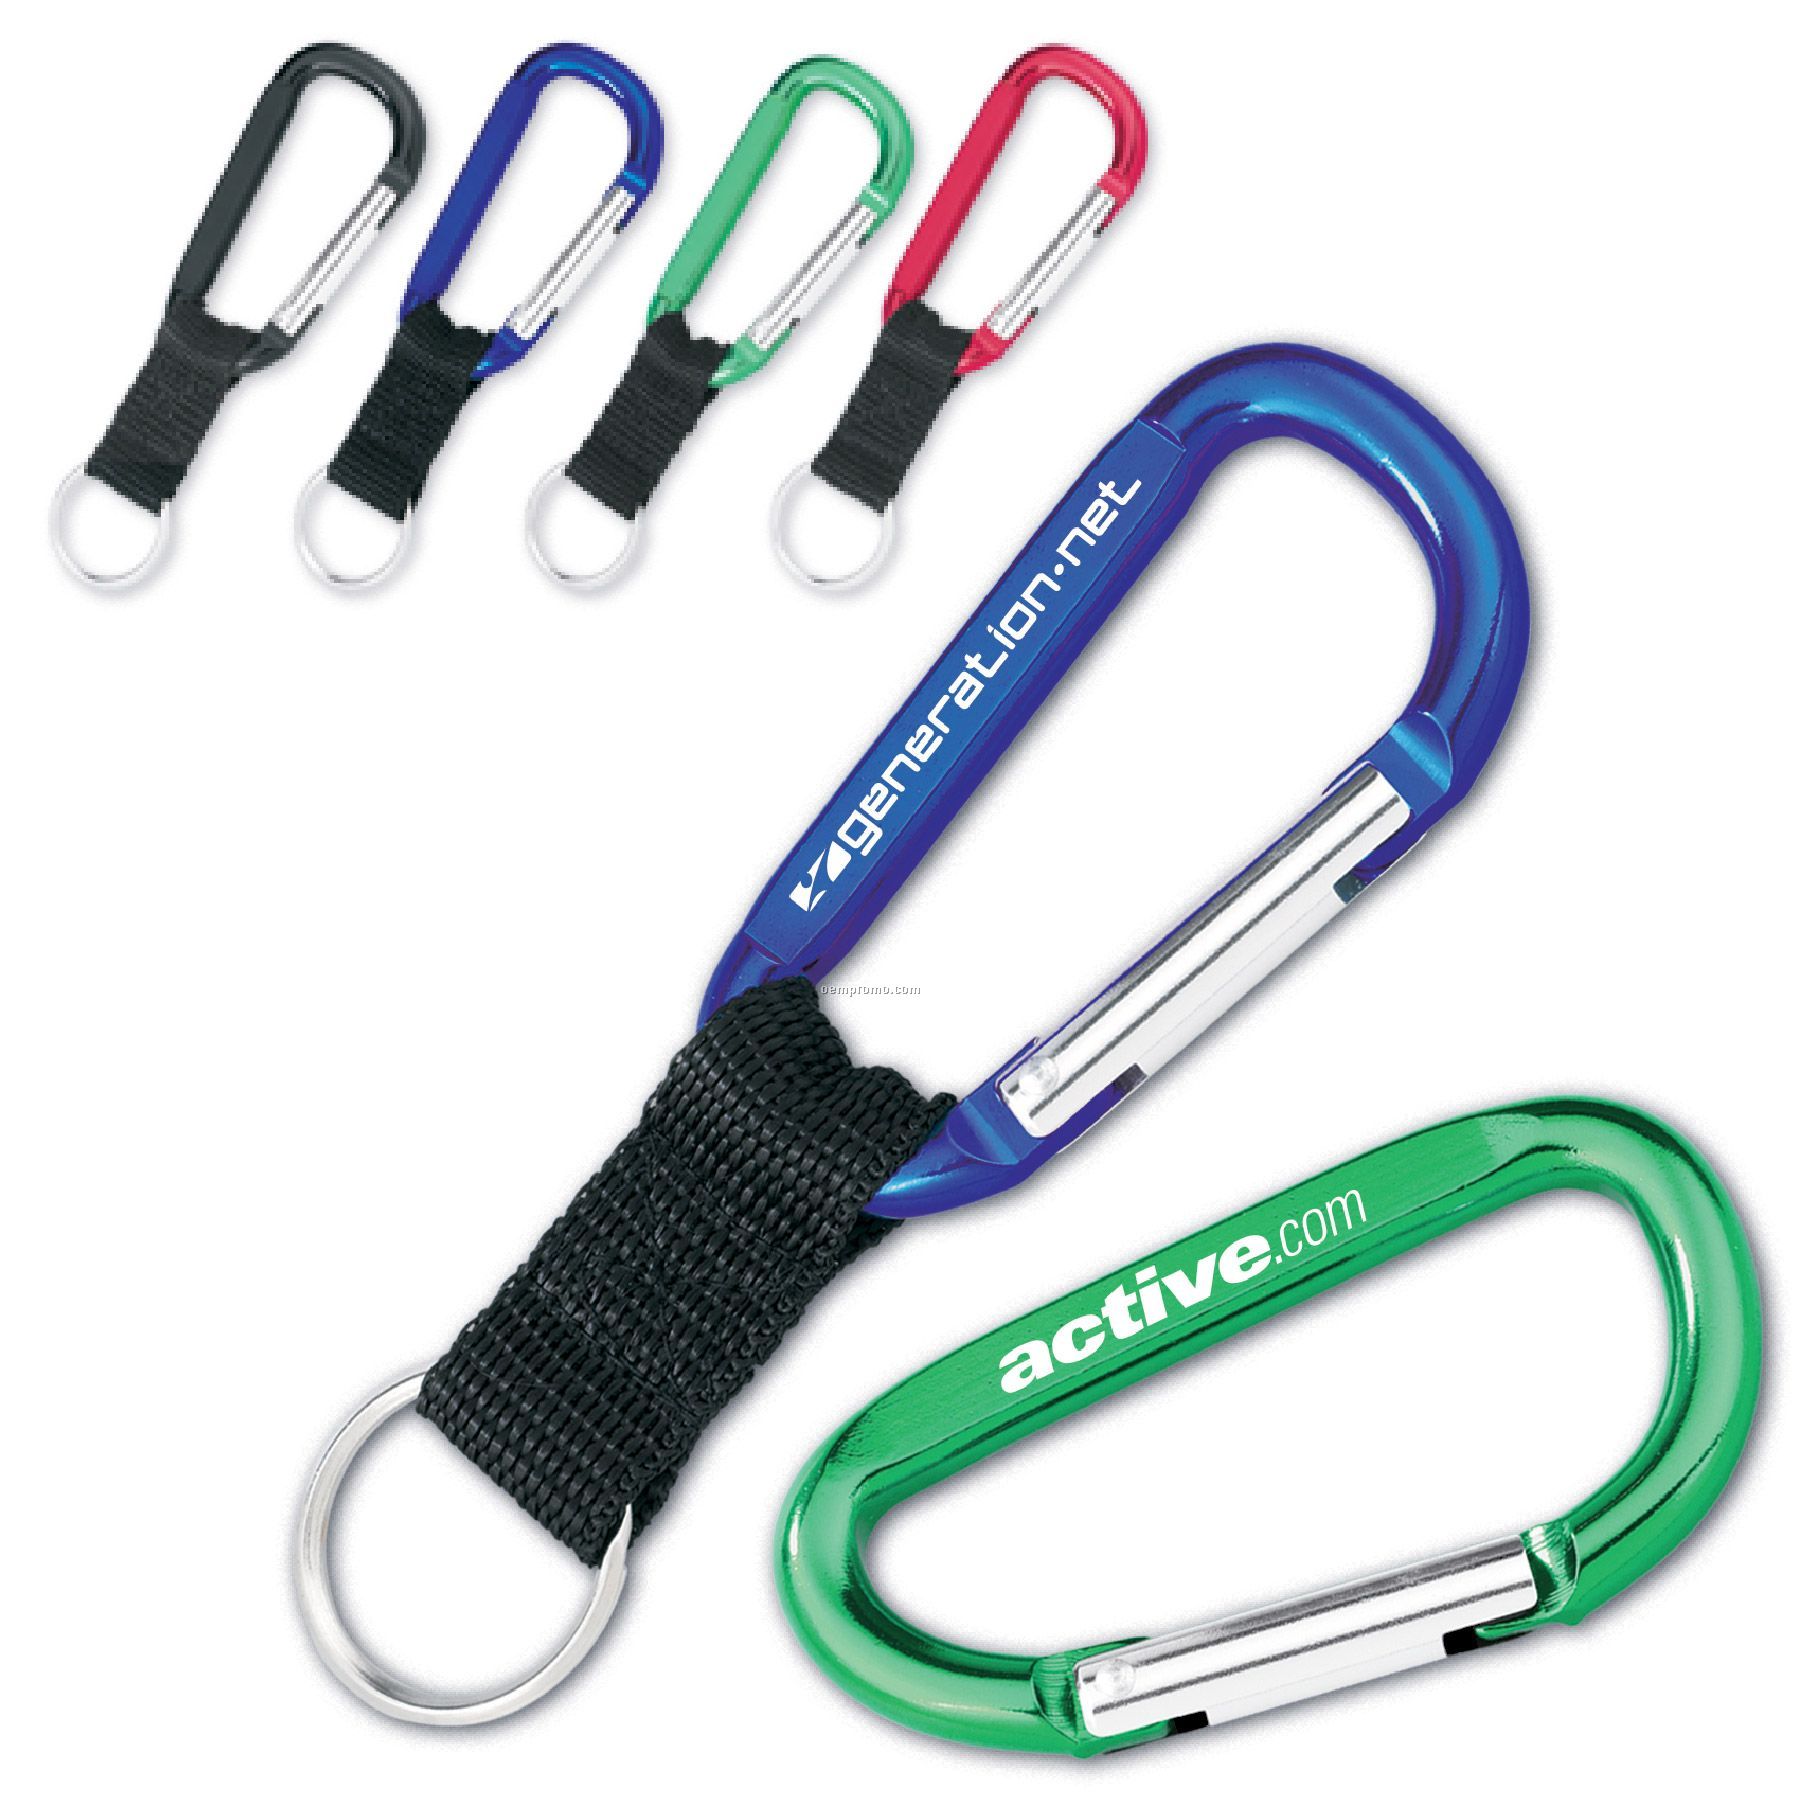 8cm Carabiner With Lanyard